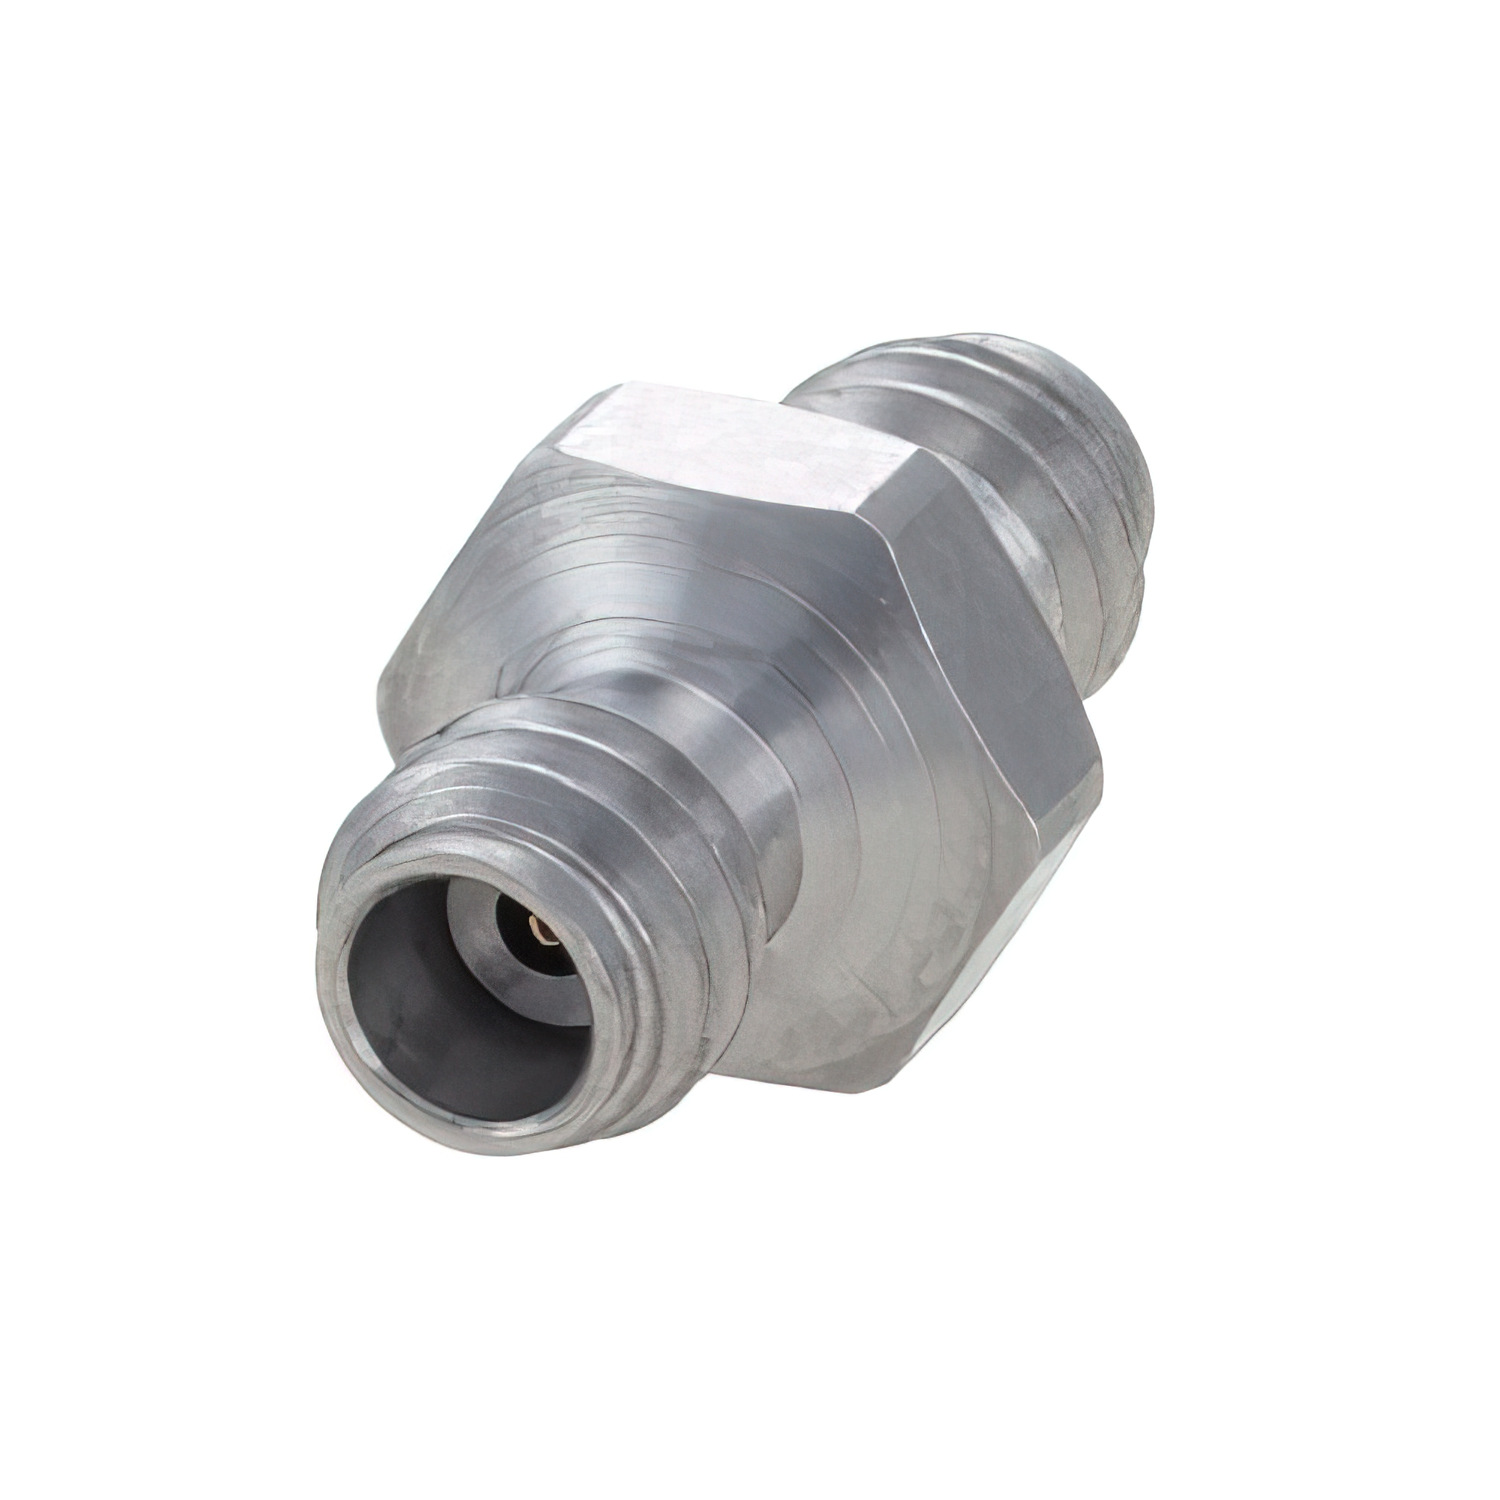 1.0mm Female to 1.0mm Female Adapter1